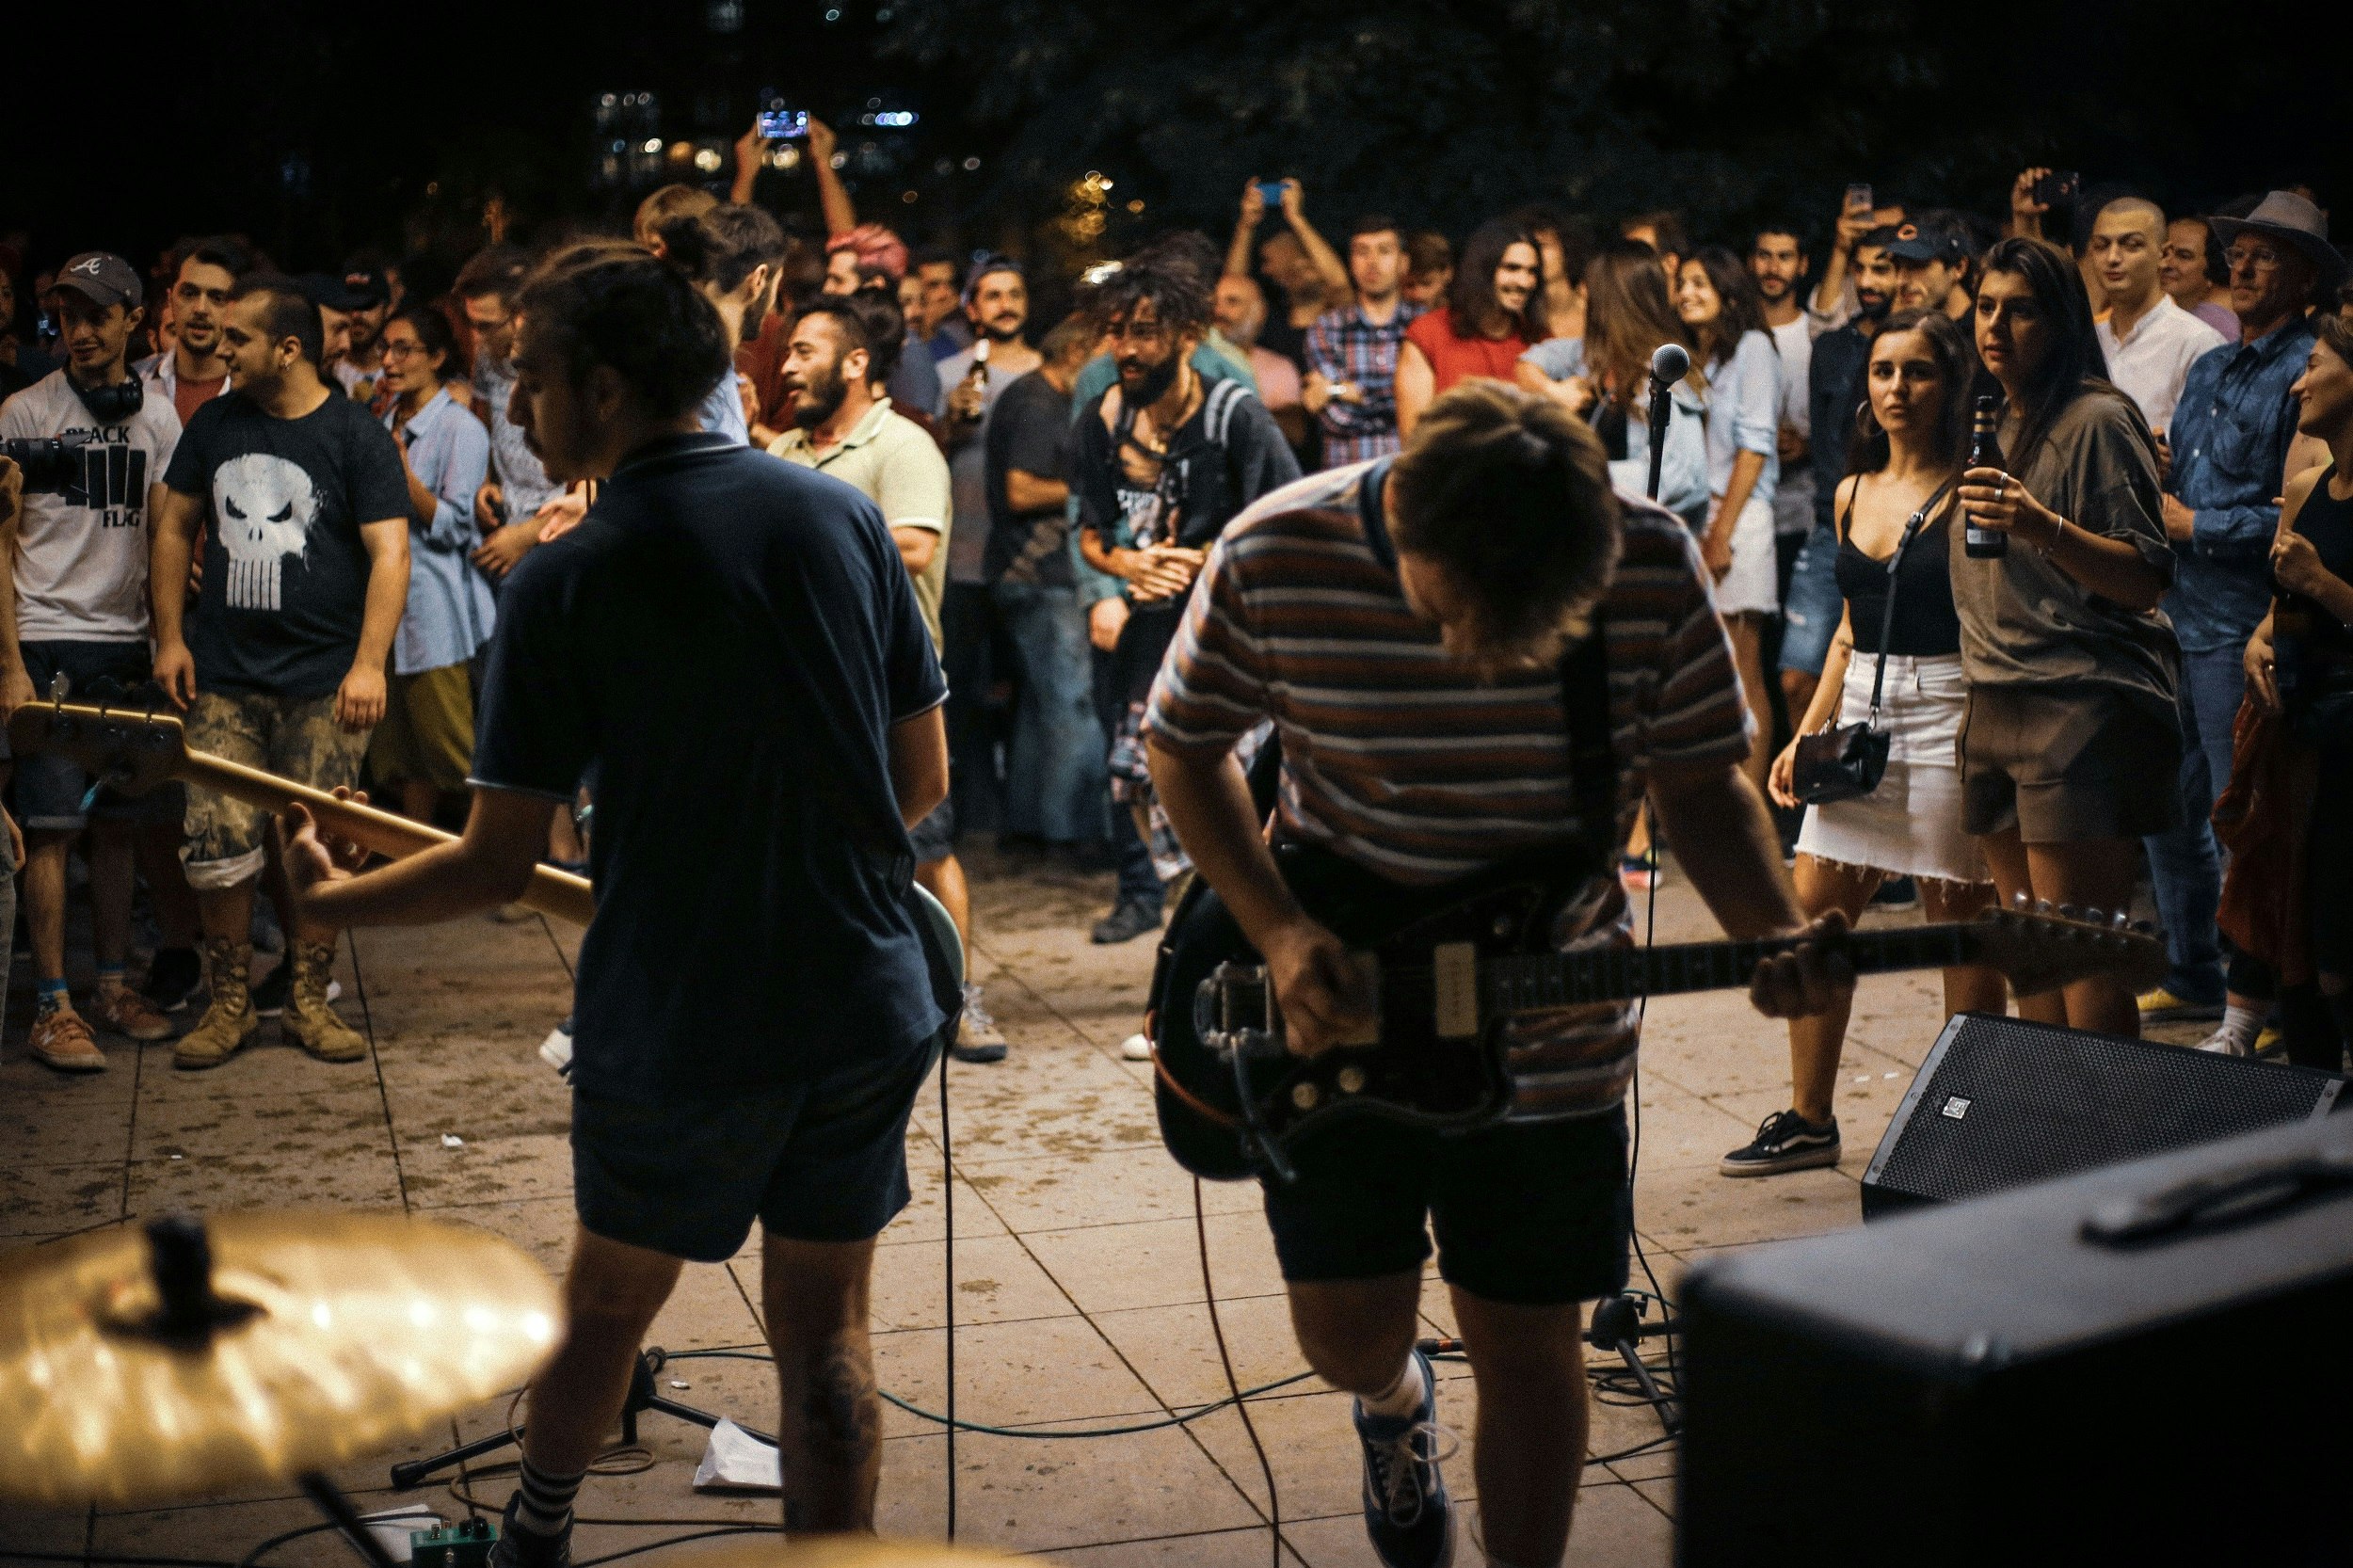 Two guitarists perform to a crowd of people. There's no stage, so the people are gathered around them, creating an intimate vibe.